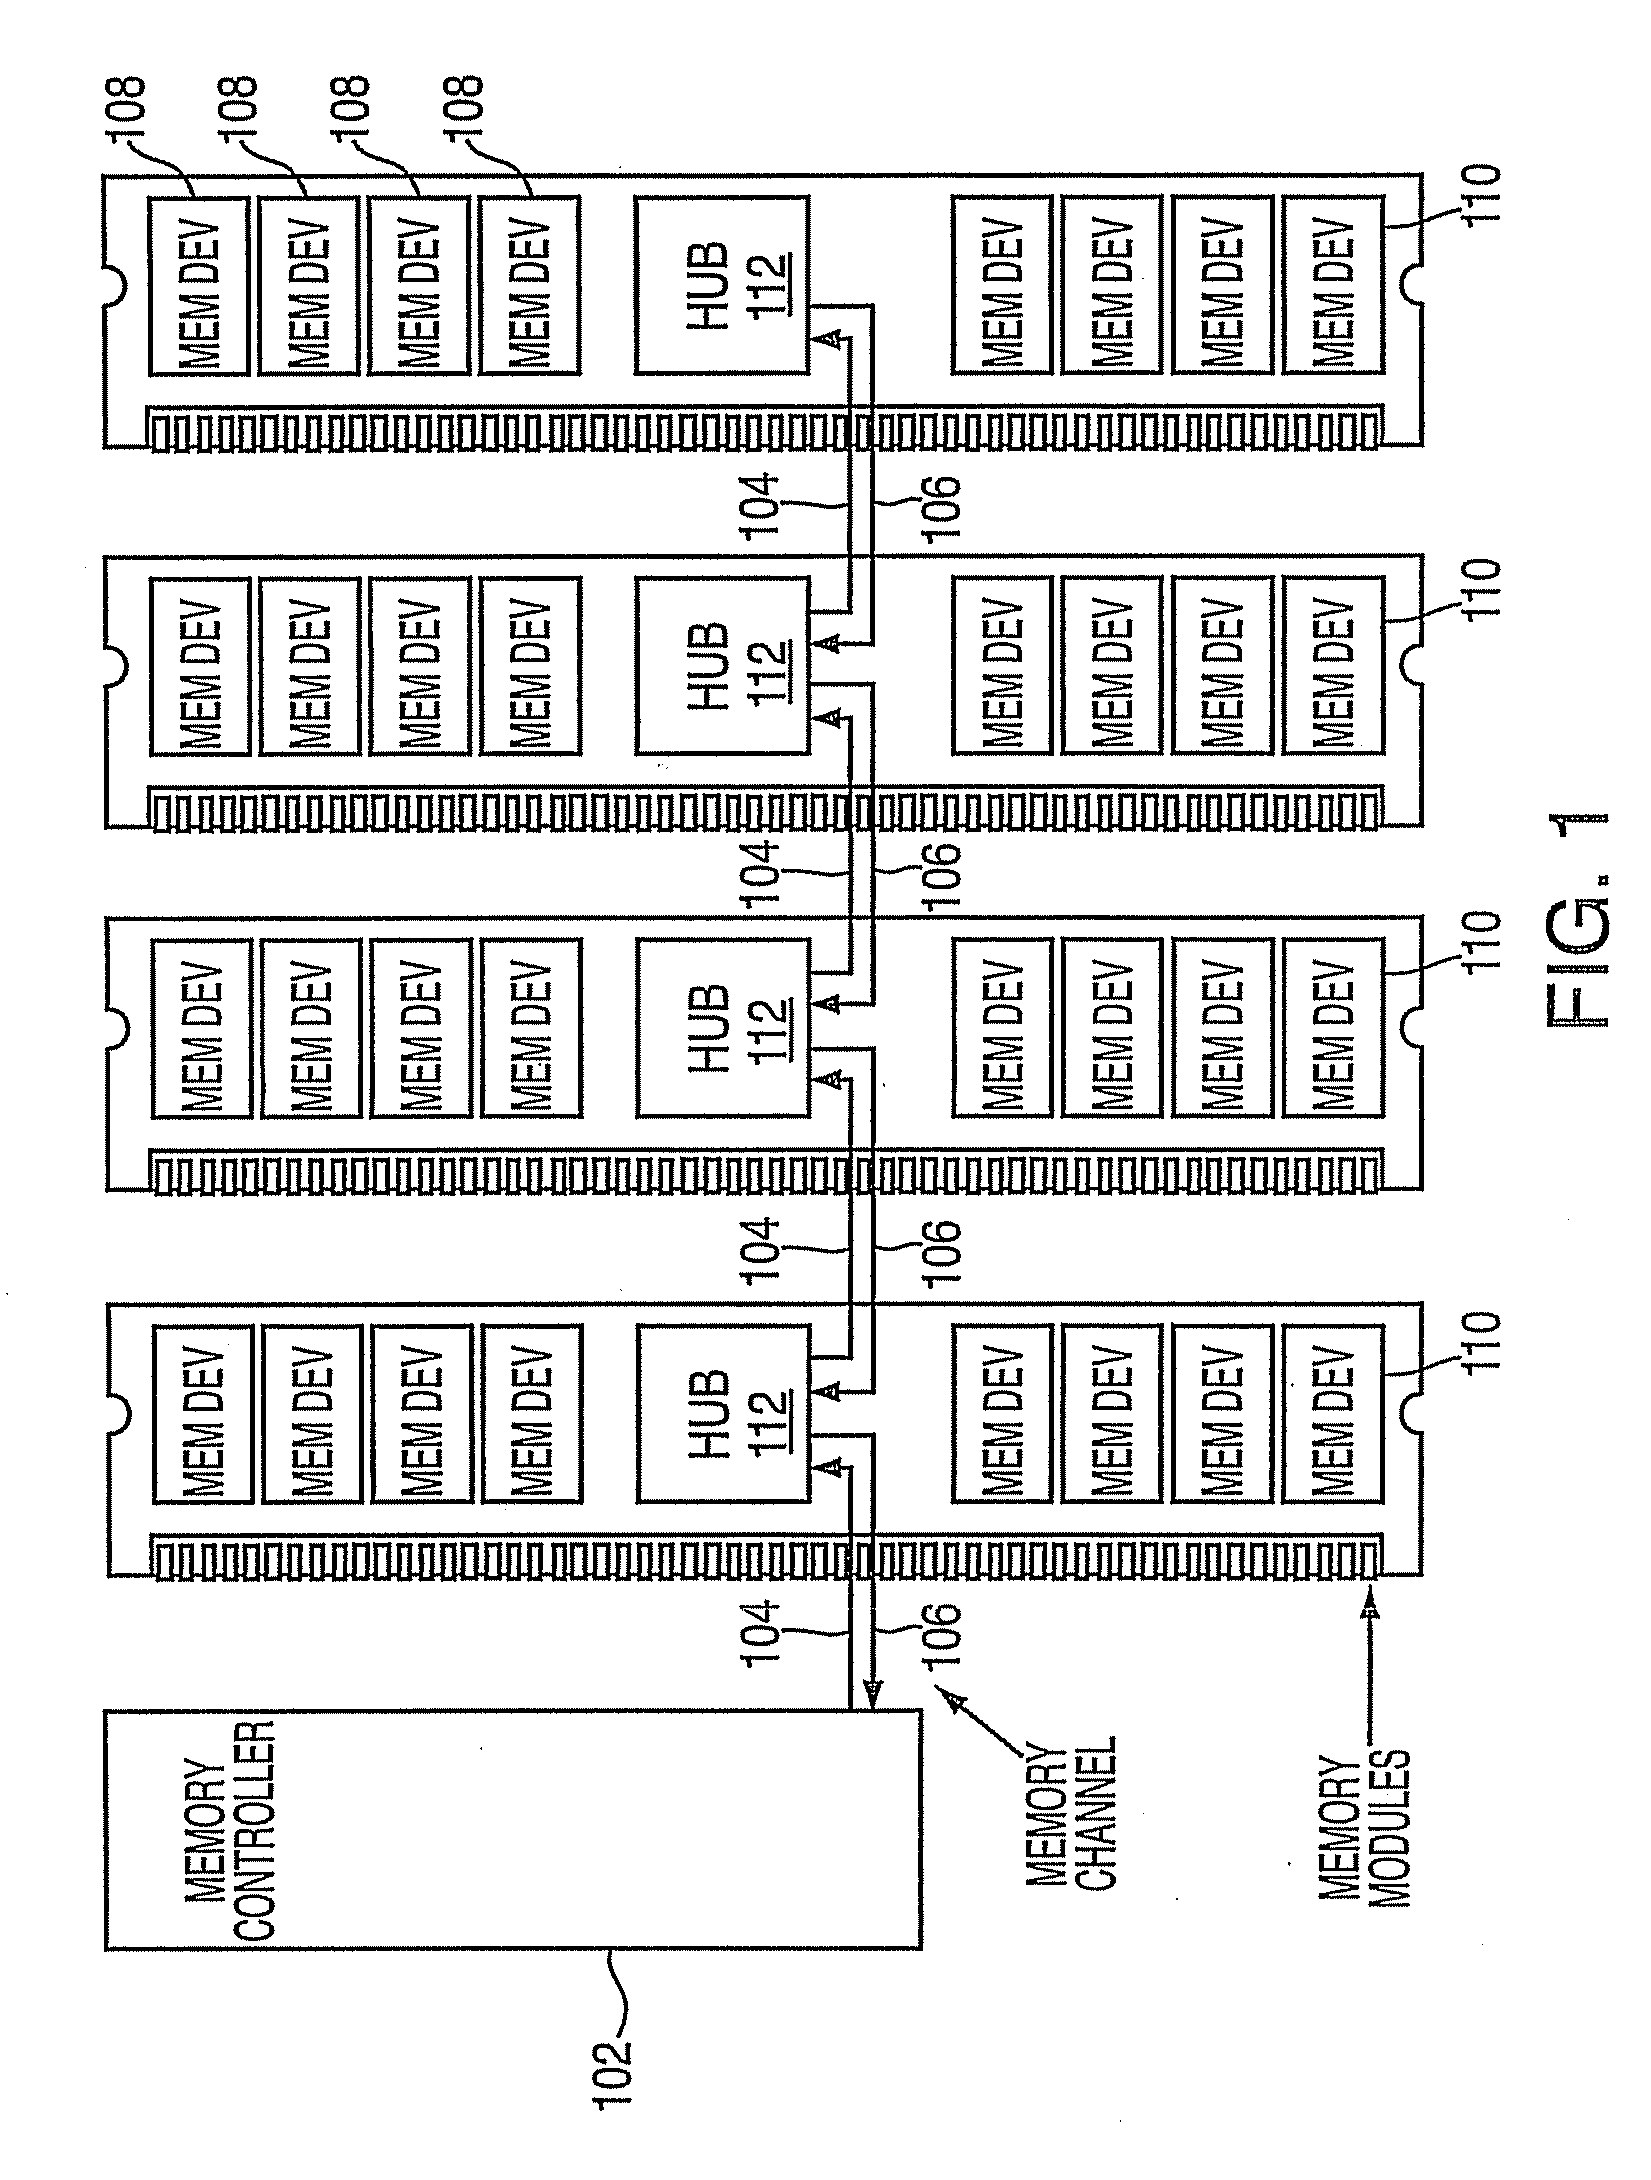 Method and system for providing indeterminate read data latency in a memory system